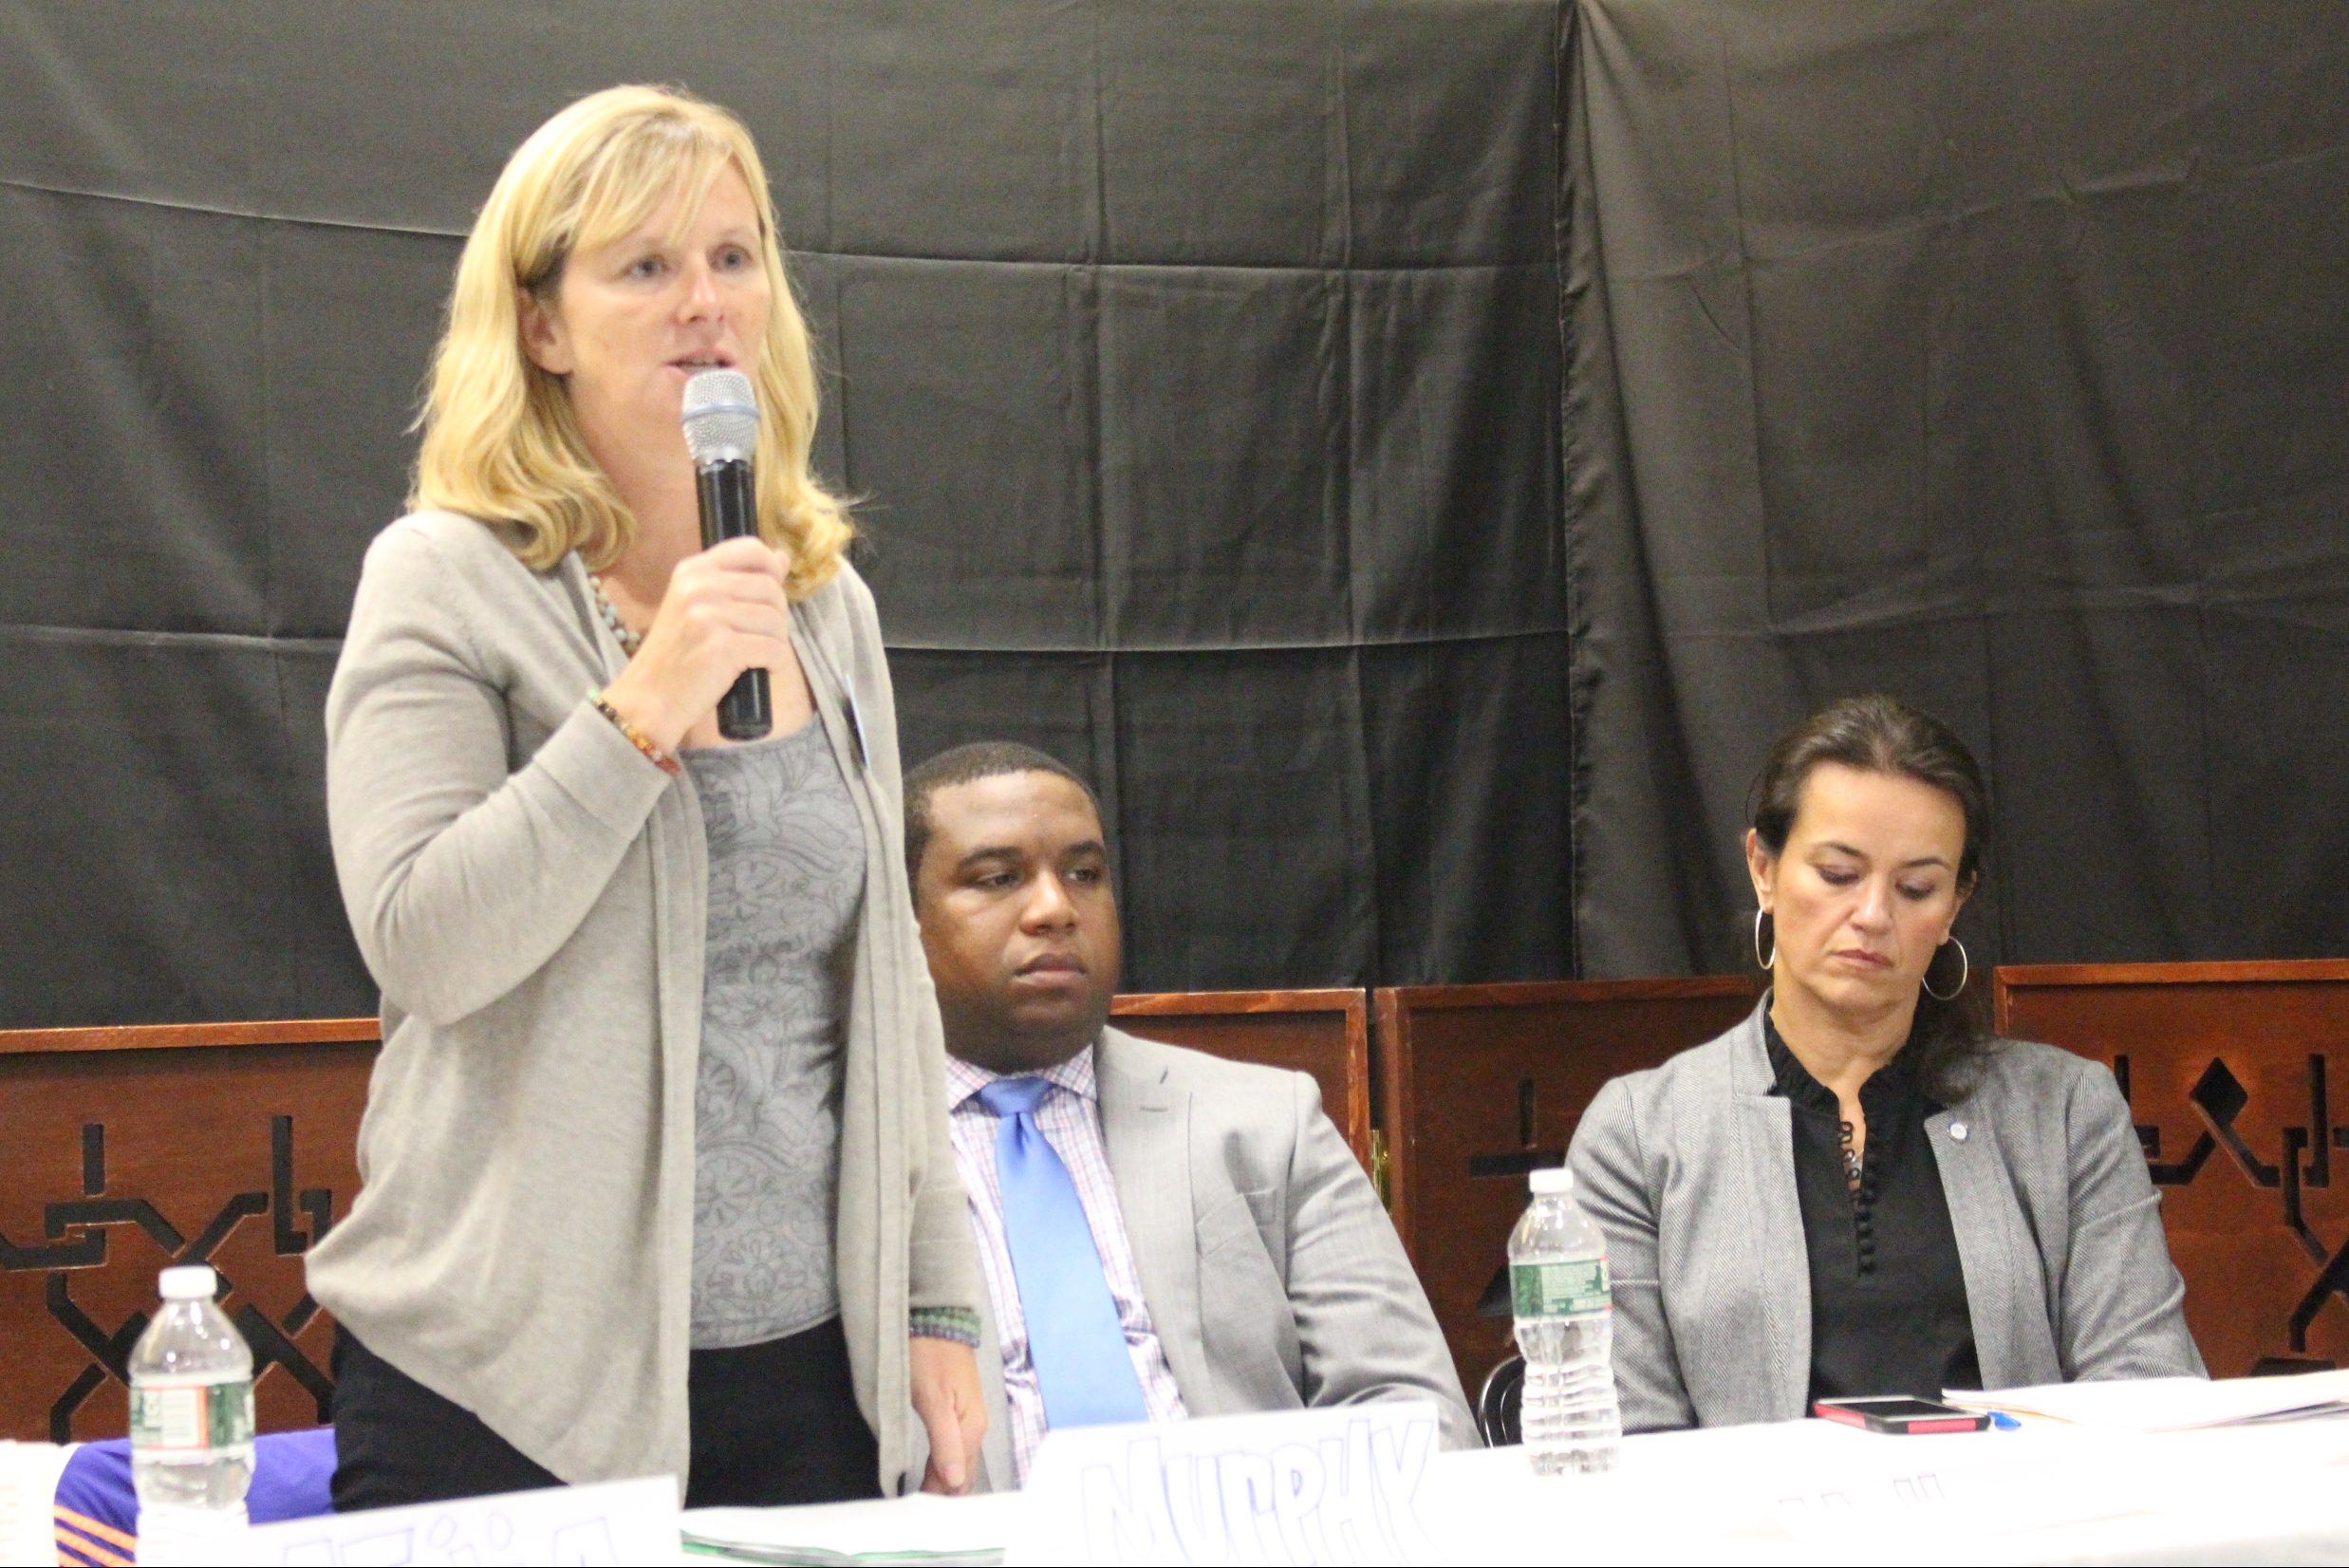 City Councilor at-large candidate Erin Murphy has repeatedly told voters that the opioid epidemic has impacted her personally. Up until last week, at the Right to the City forum on Oct. 9, she had never publicly disclosed any details. Photo by Alexa Gagosz.